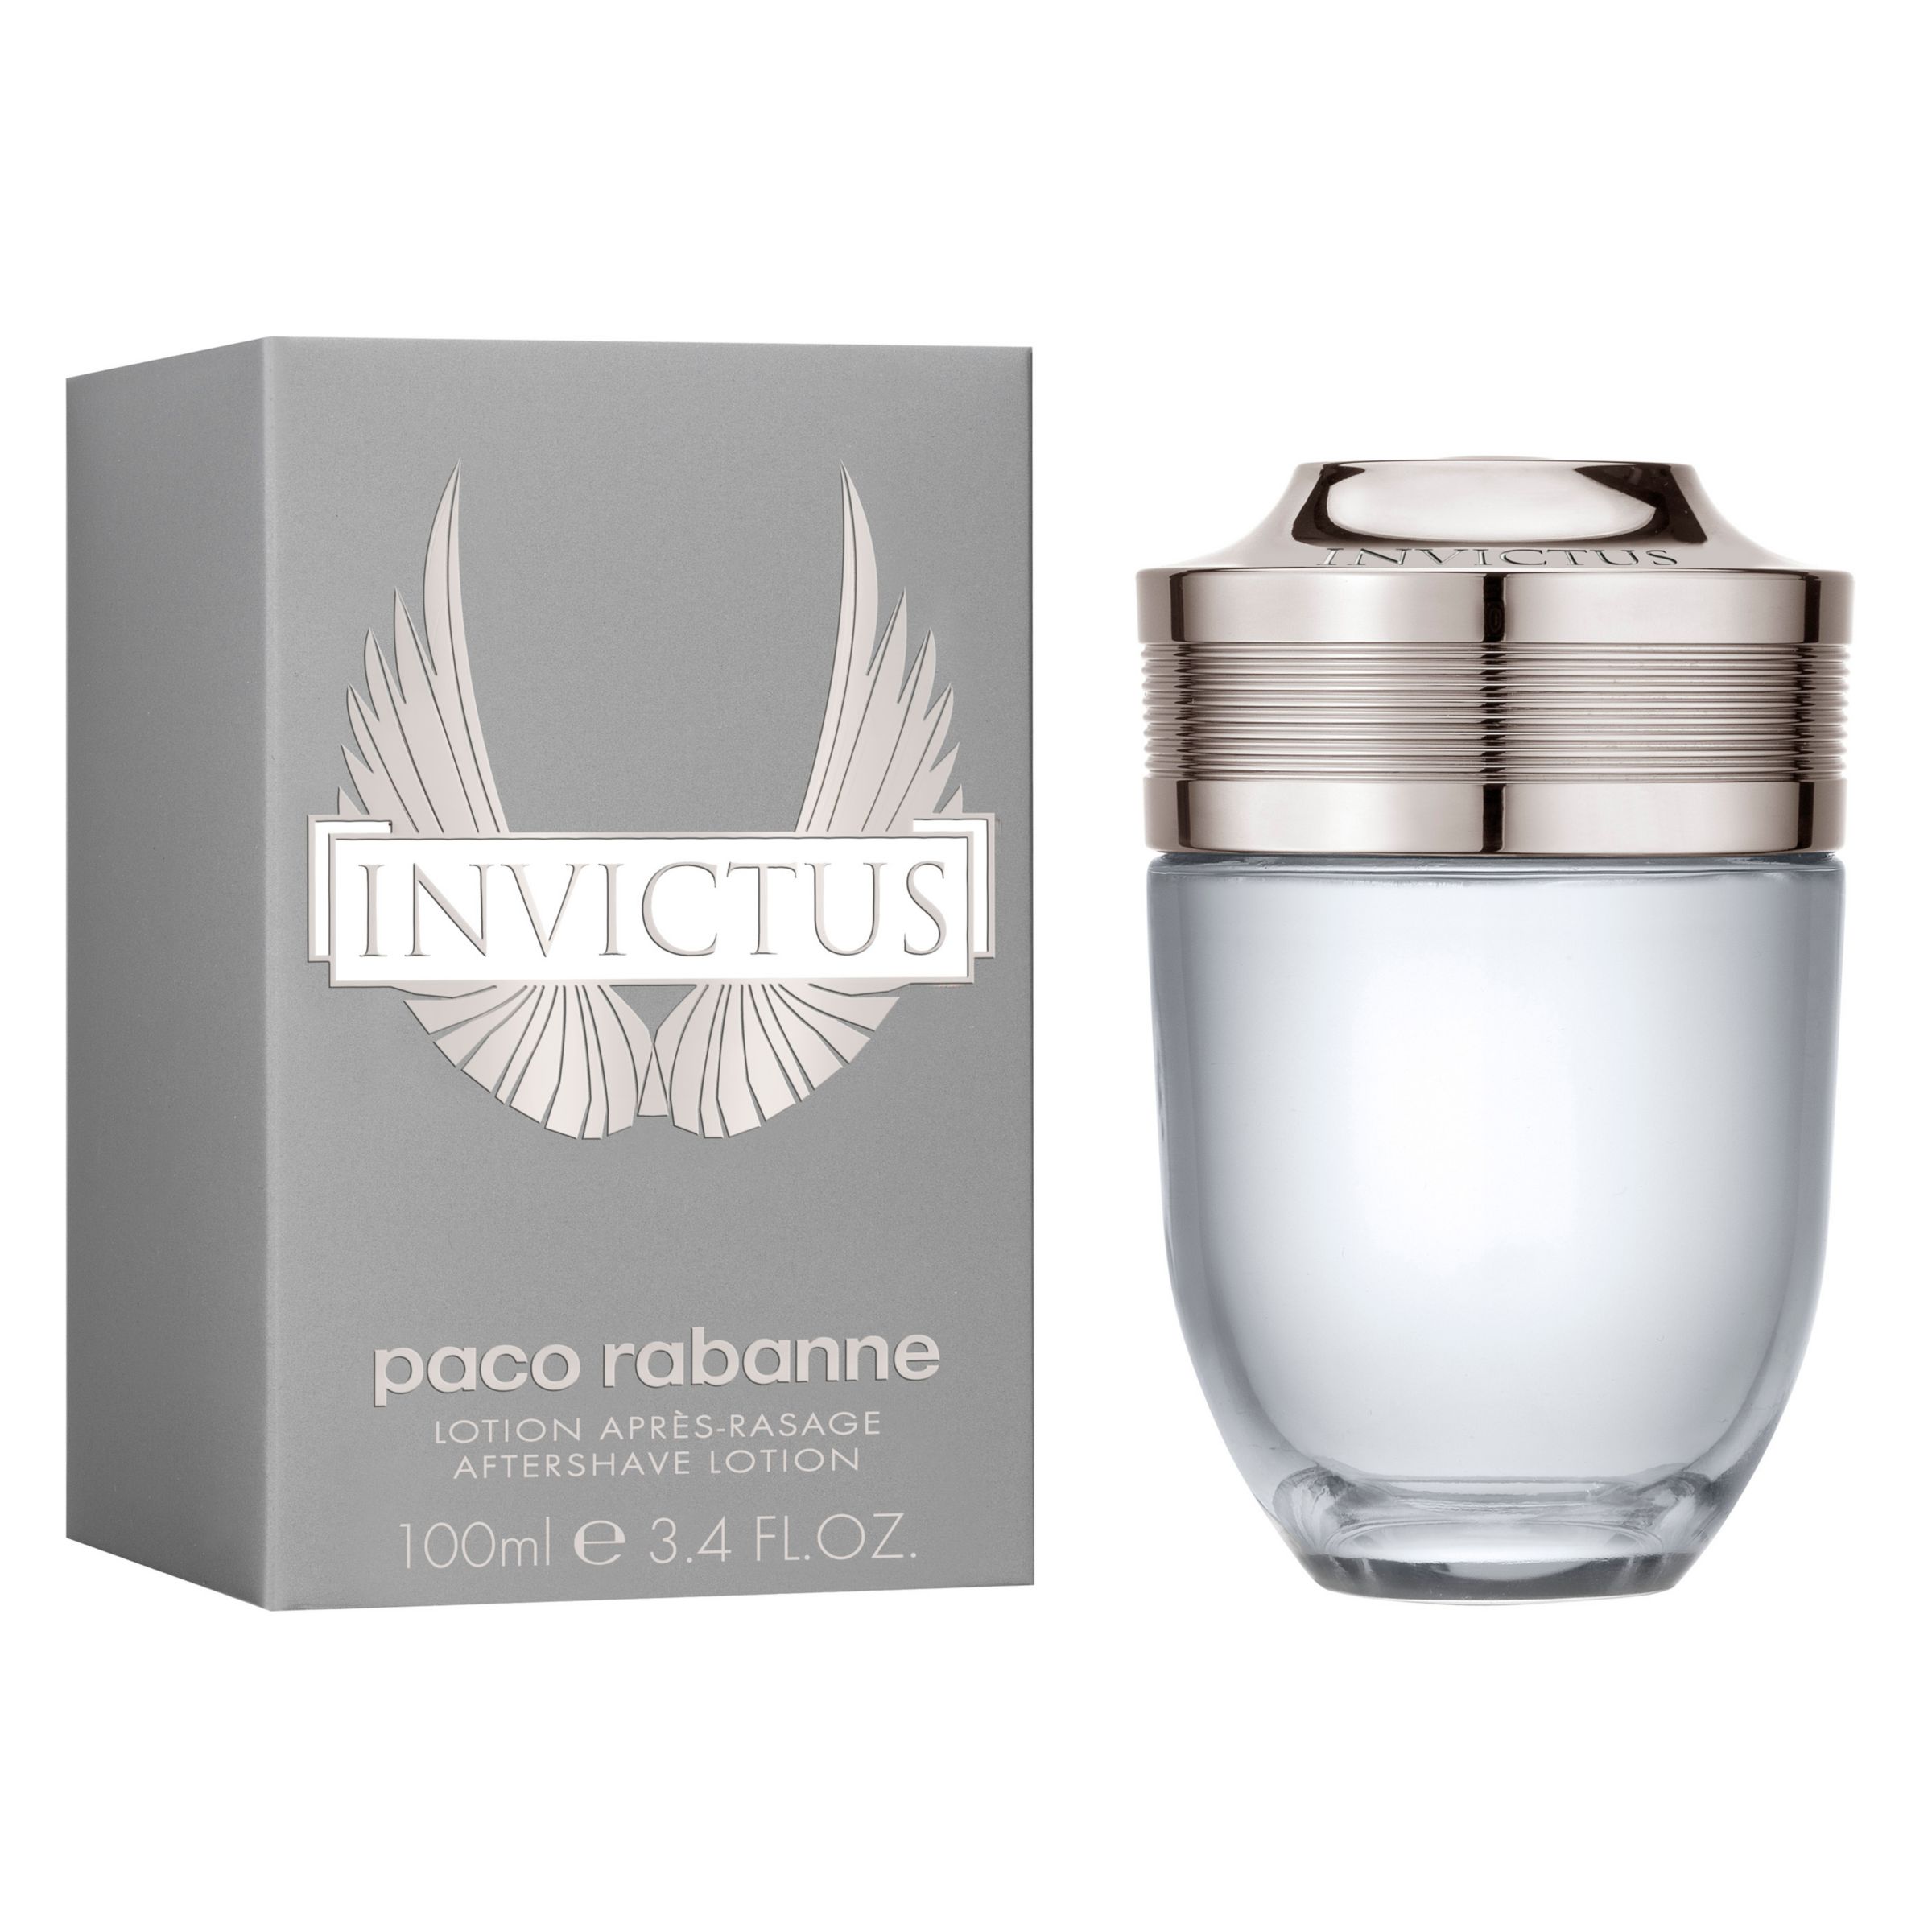 Rabanne Invictus Aftershave Lotion, 100ml at John Lewis & Partners